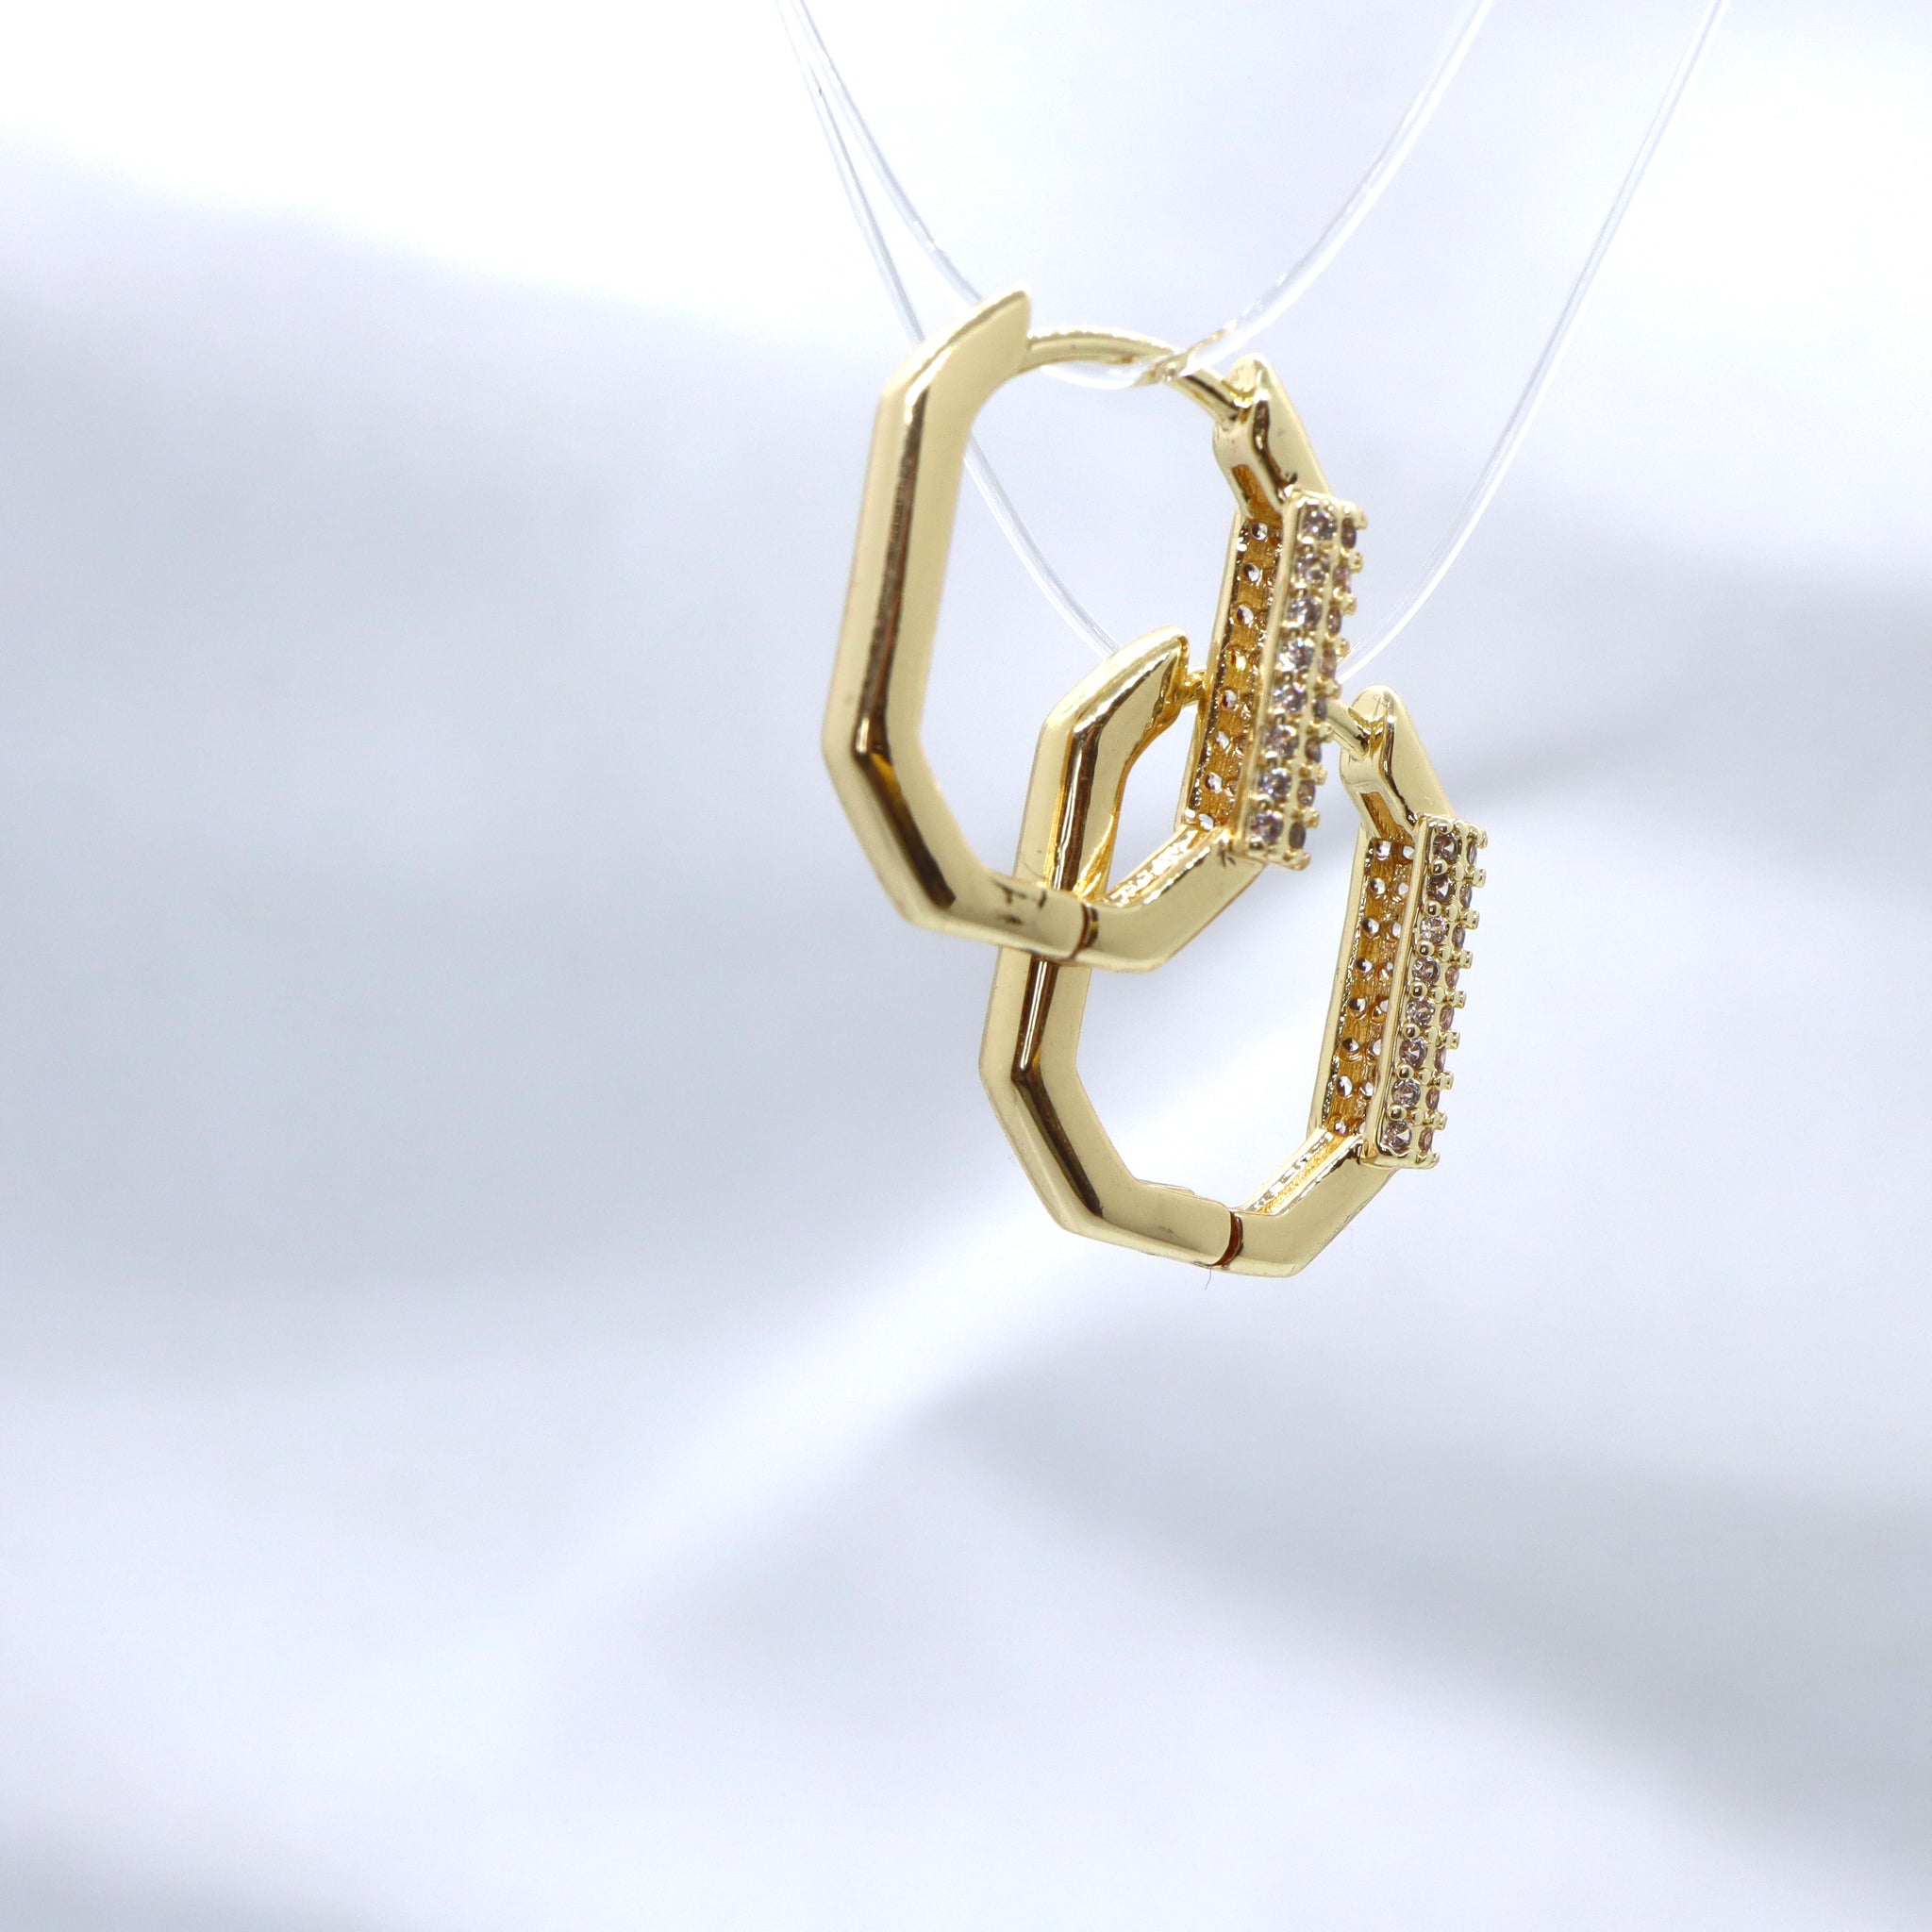 18k Gold-Plated Chic Rectangle Hoop Earrings